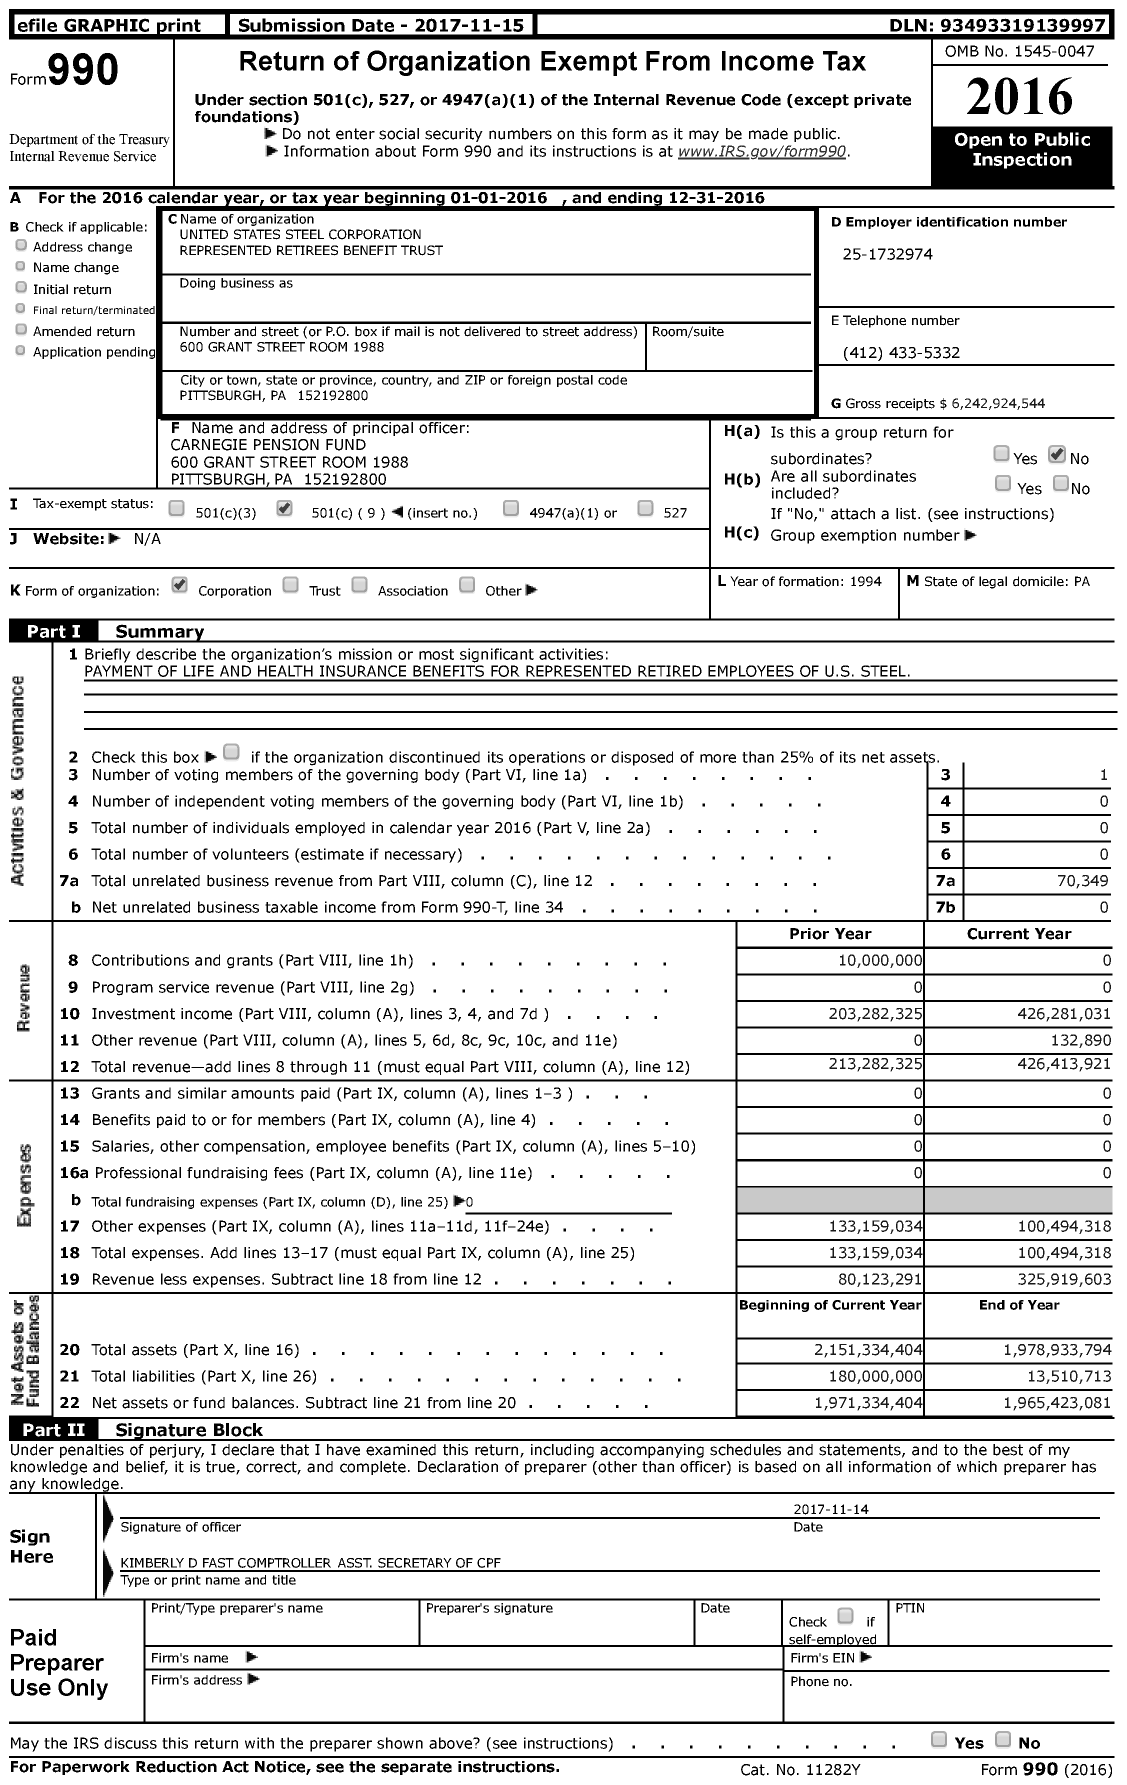 Image of first page of 2016 Form 990 for United States Steel Corporation Represented Retirees Benefit Trust